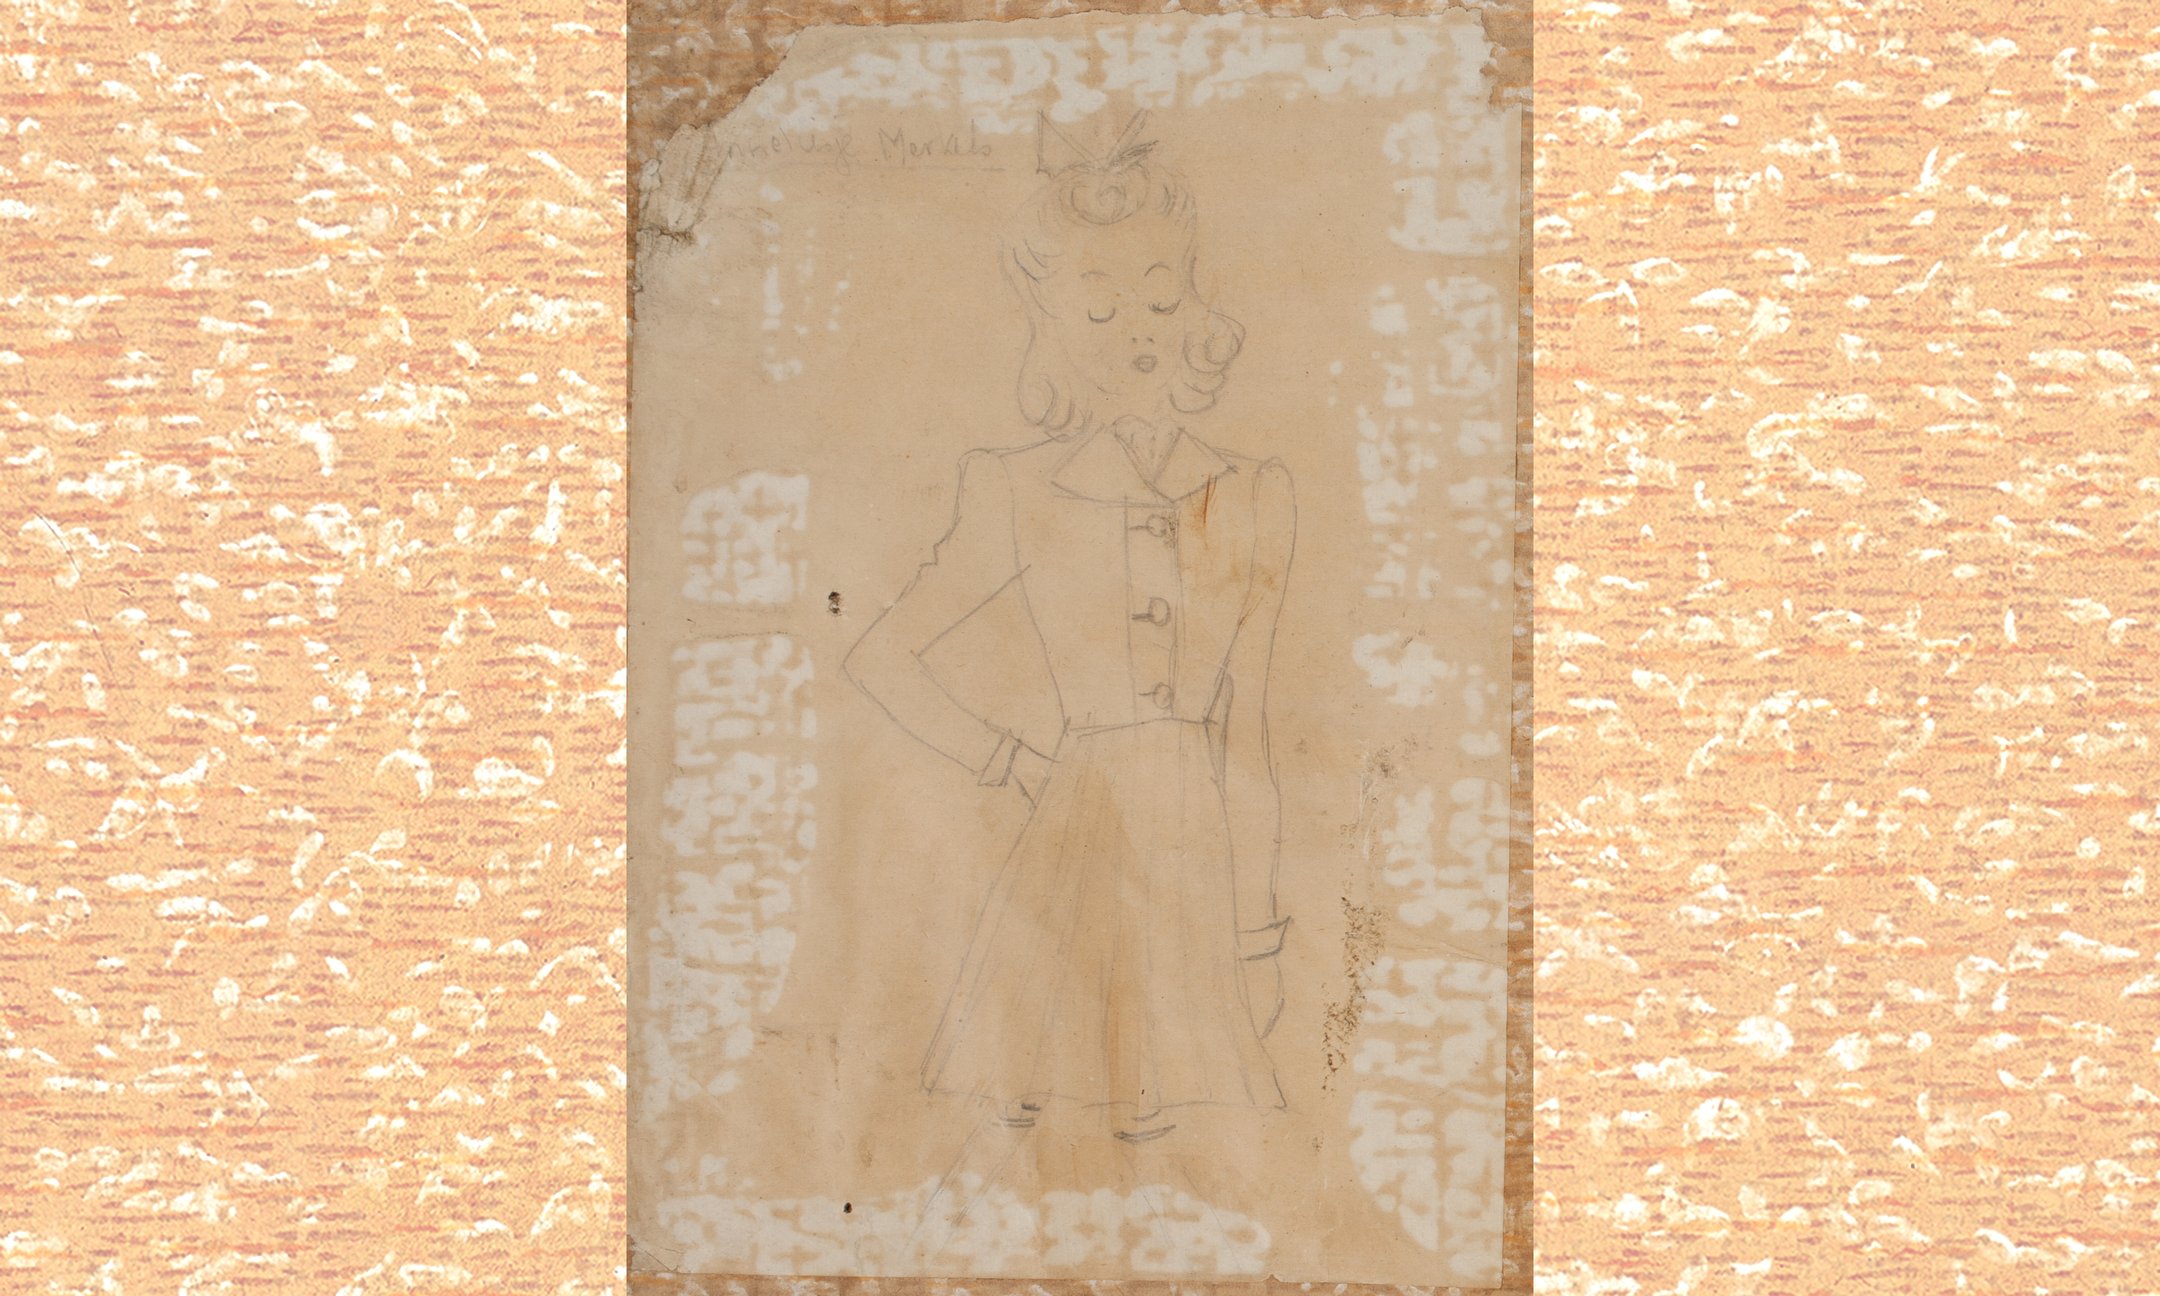 Two pencil drawings of a girl hung on the walls of Anne’s room. Unfortunately one drawing has disappeared. Anne wrote in her diary that she thought it was a shame she couldn’t draw well.